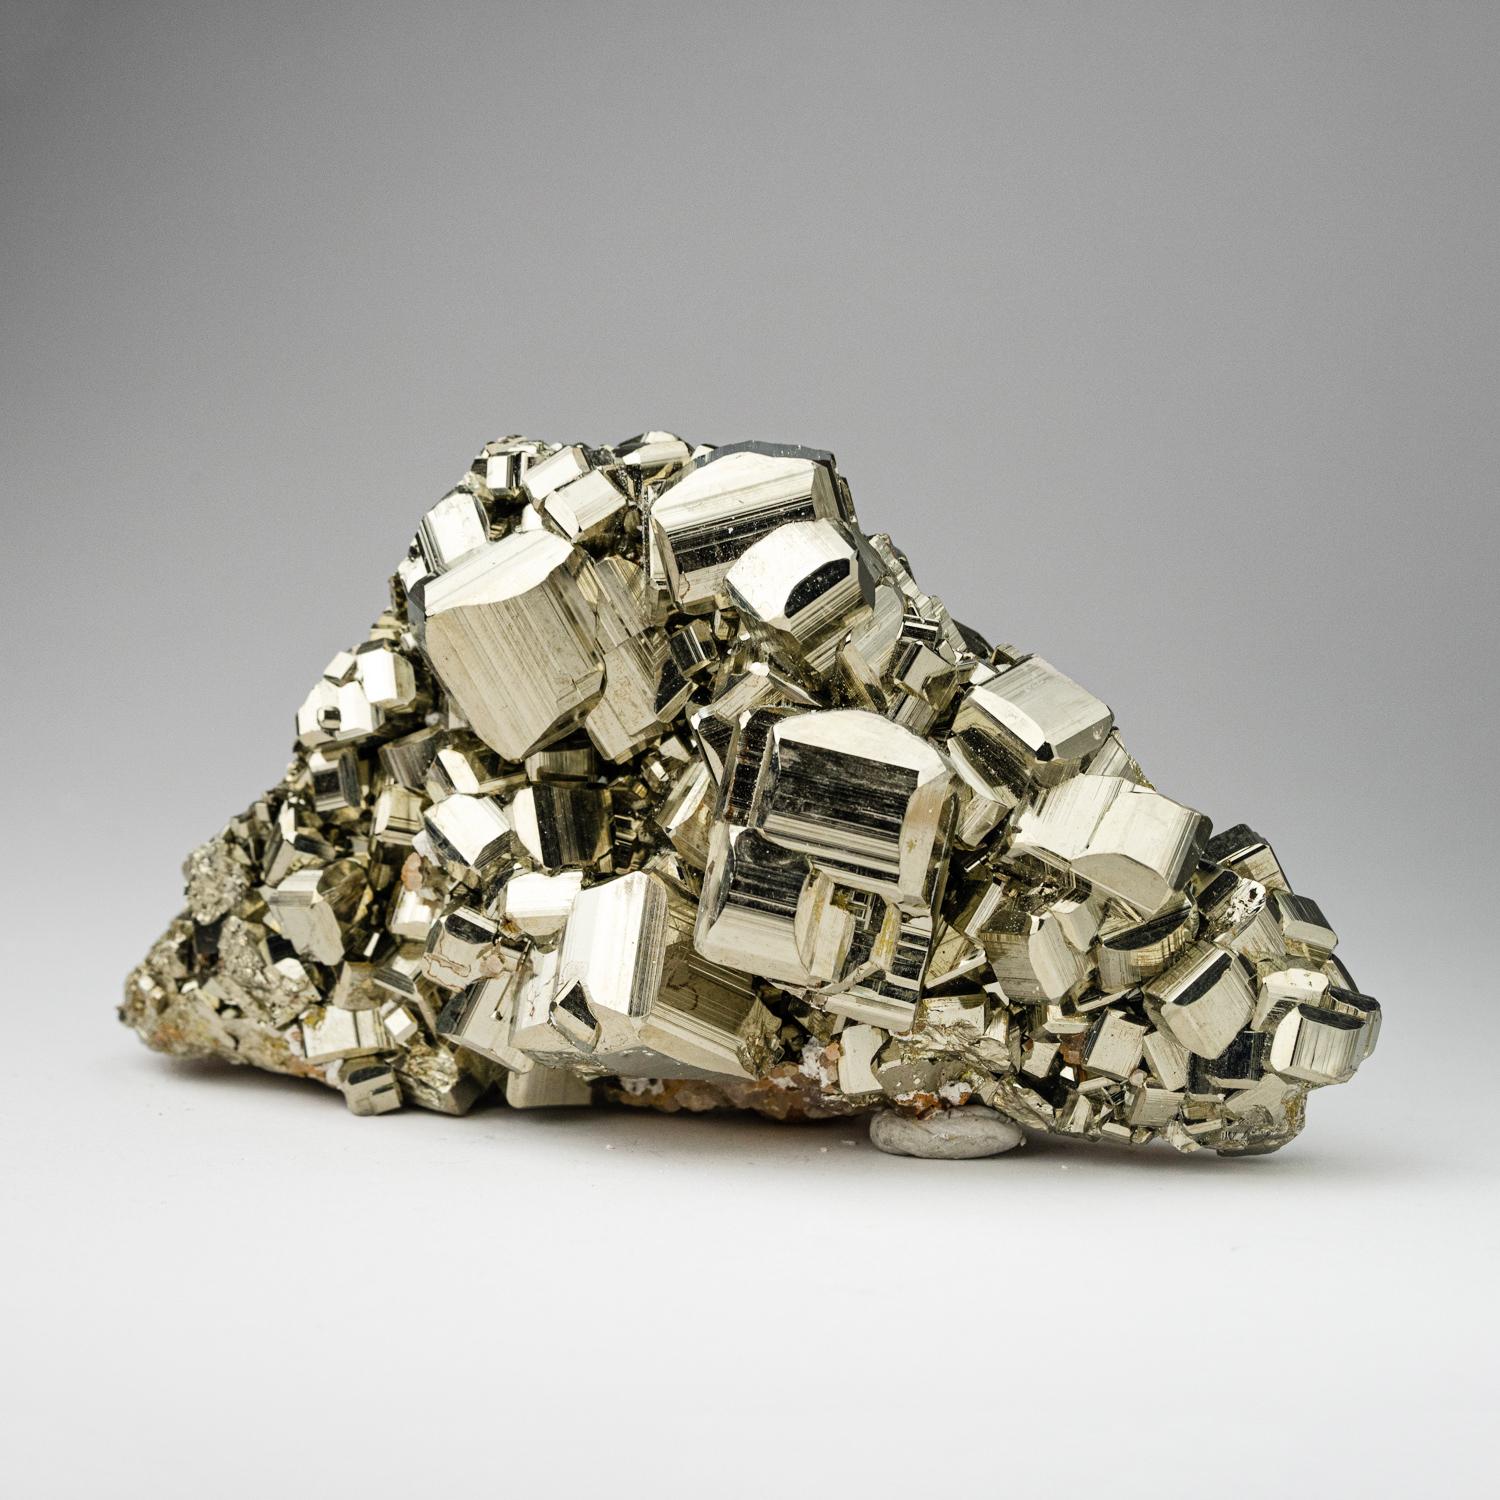 A world-class cluster of perfectly terminated cubic Pyrite crystals, interlocked on it's natural Basalt matrix. This specimen was discovered in the famous mines of Huanuco Province, Peru - considered one of the finest locations in the world for